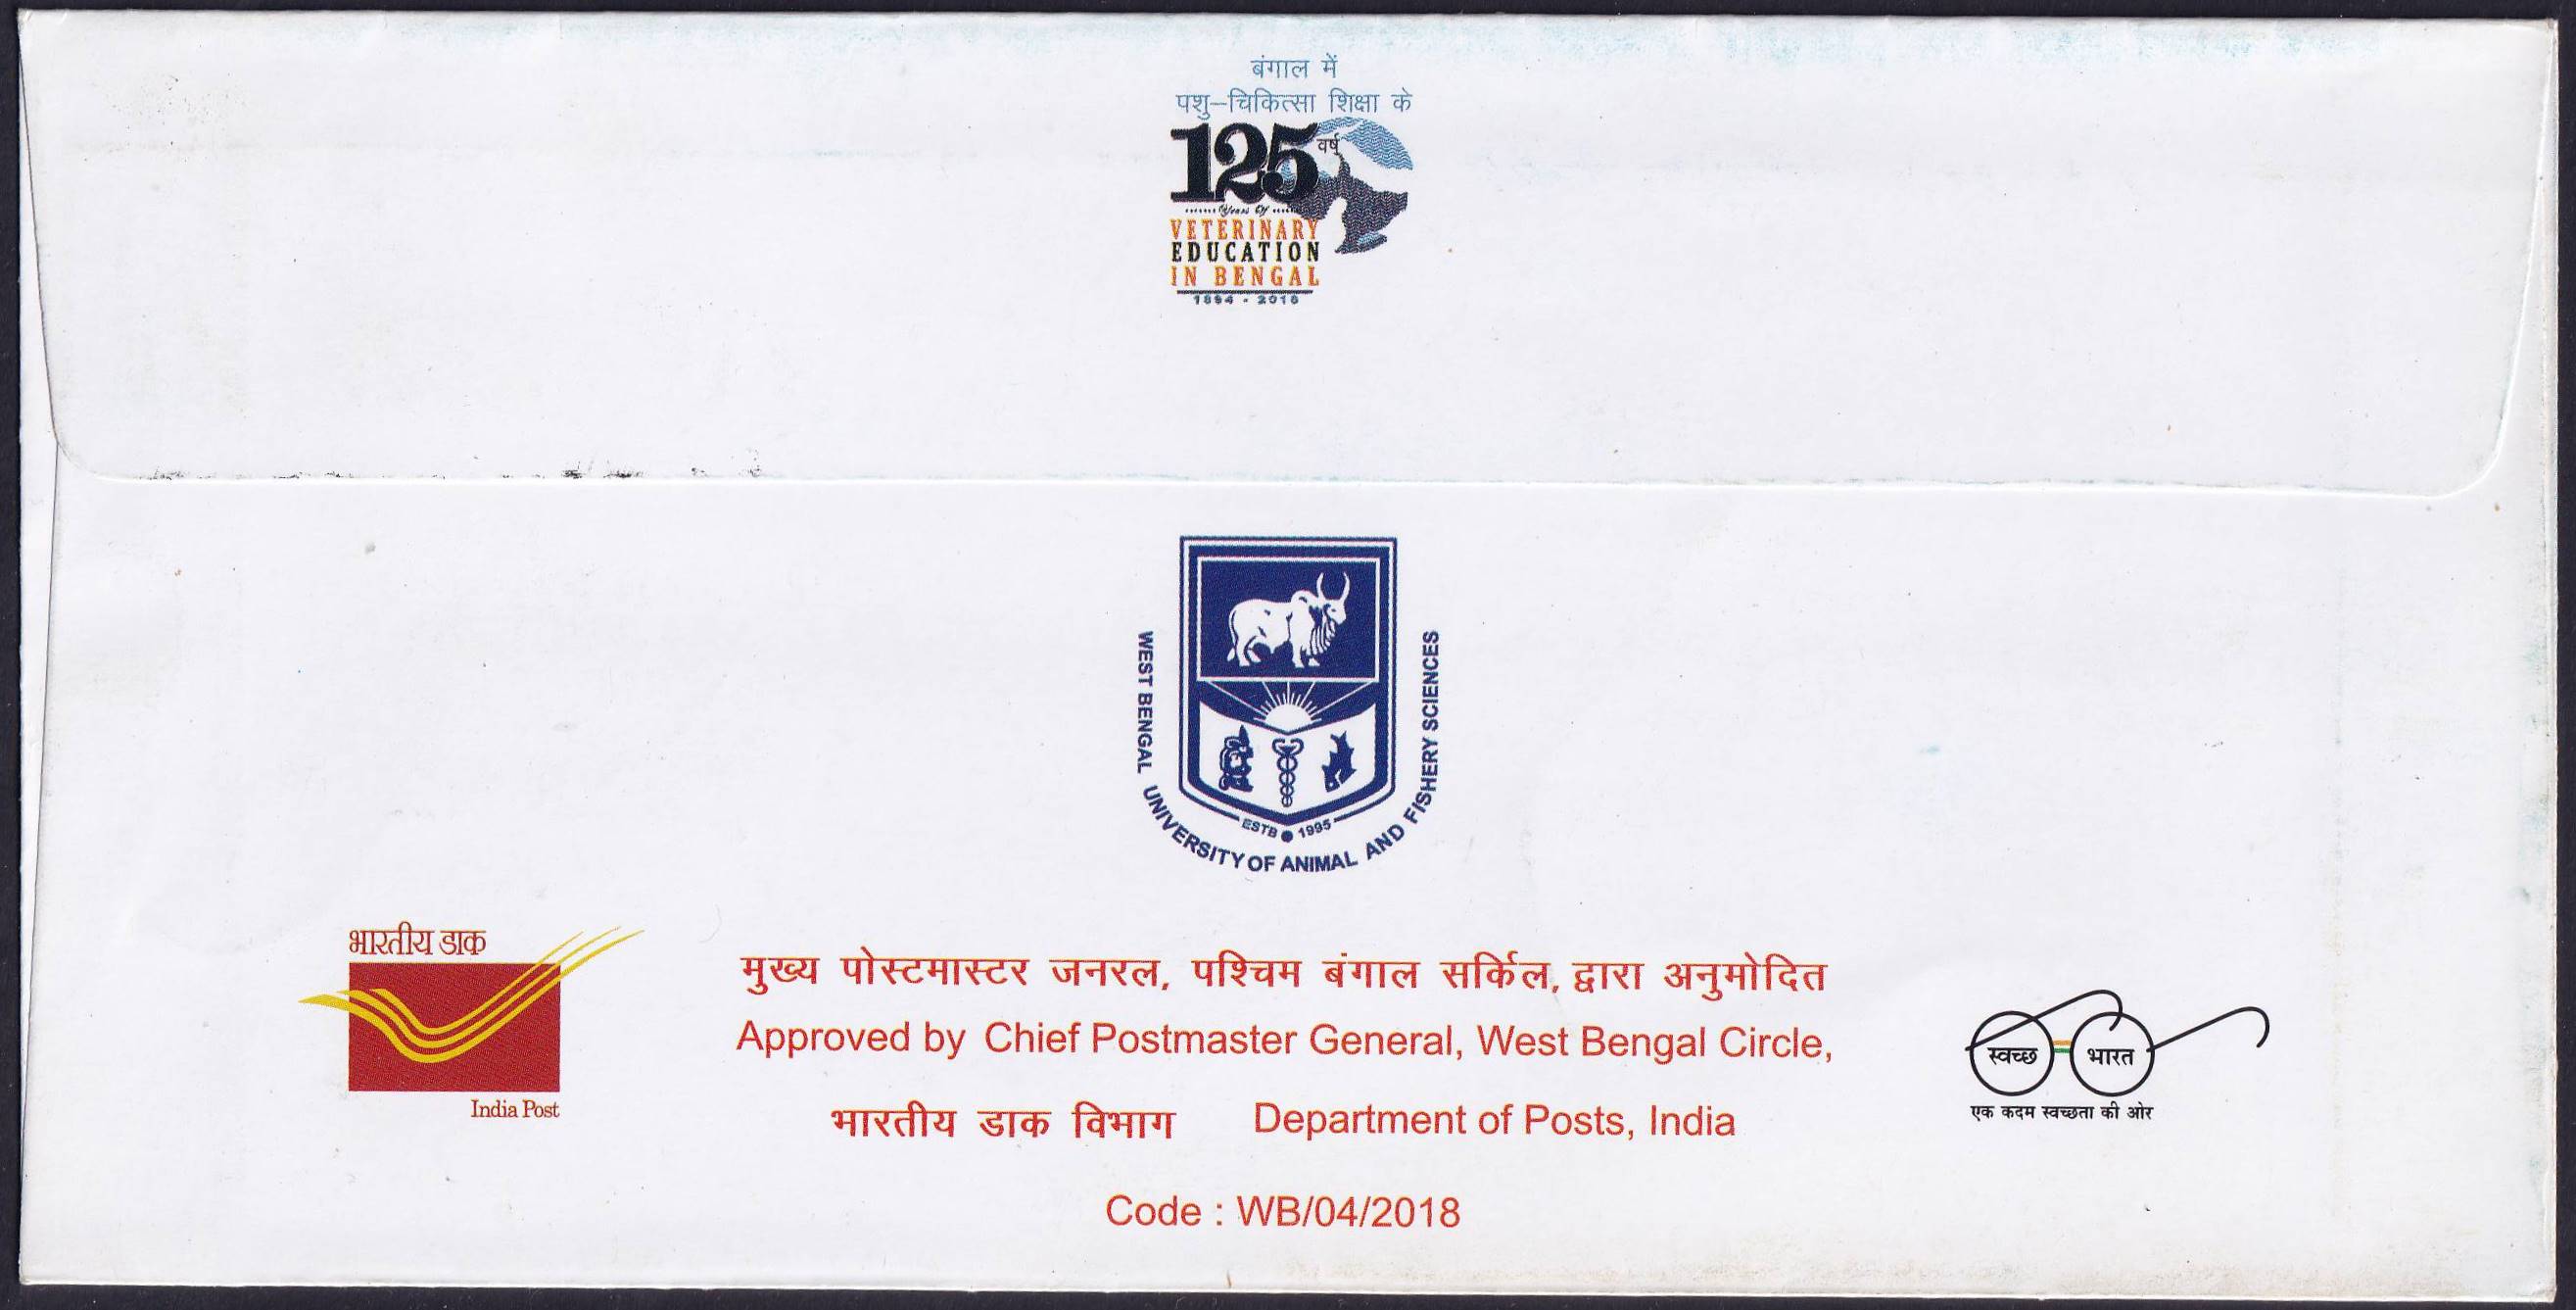 India 2018 Special Cover, West Bengal University of Animal and Fishery  Sciences (SS1039)